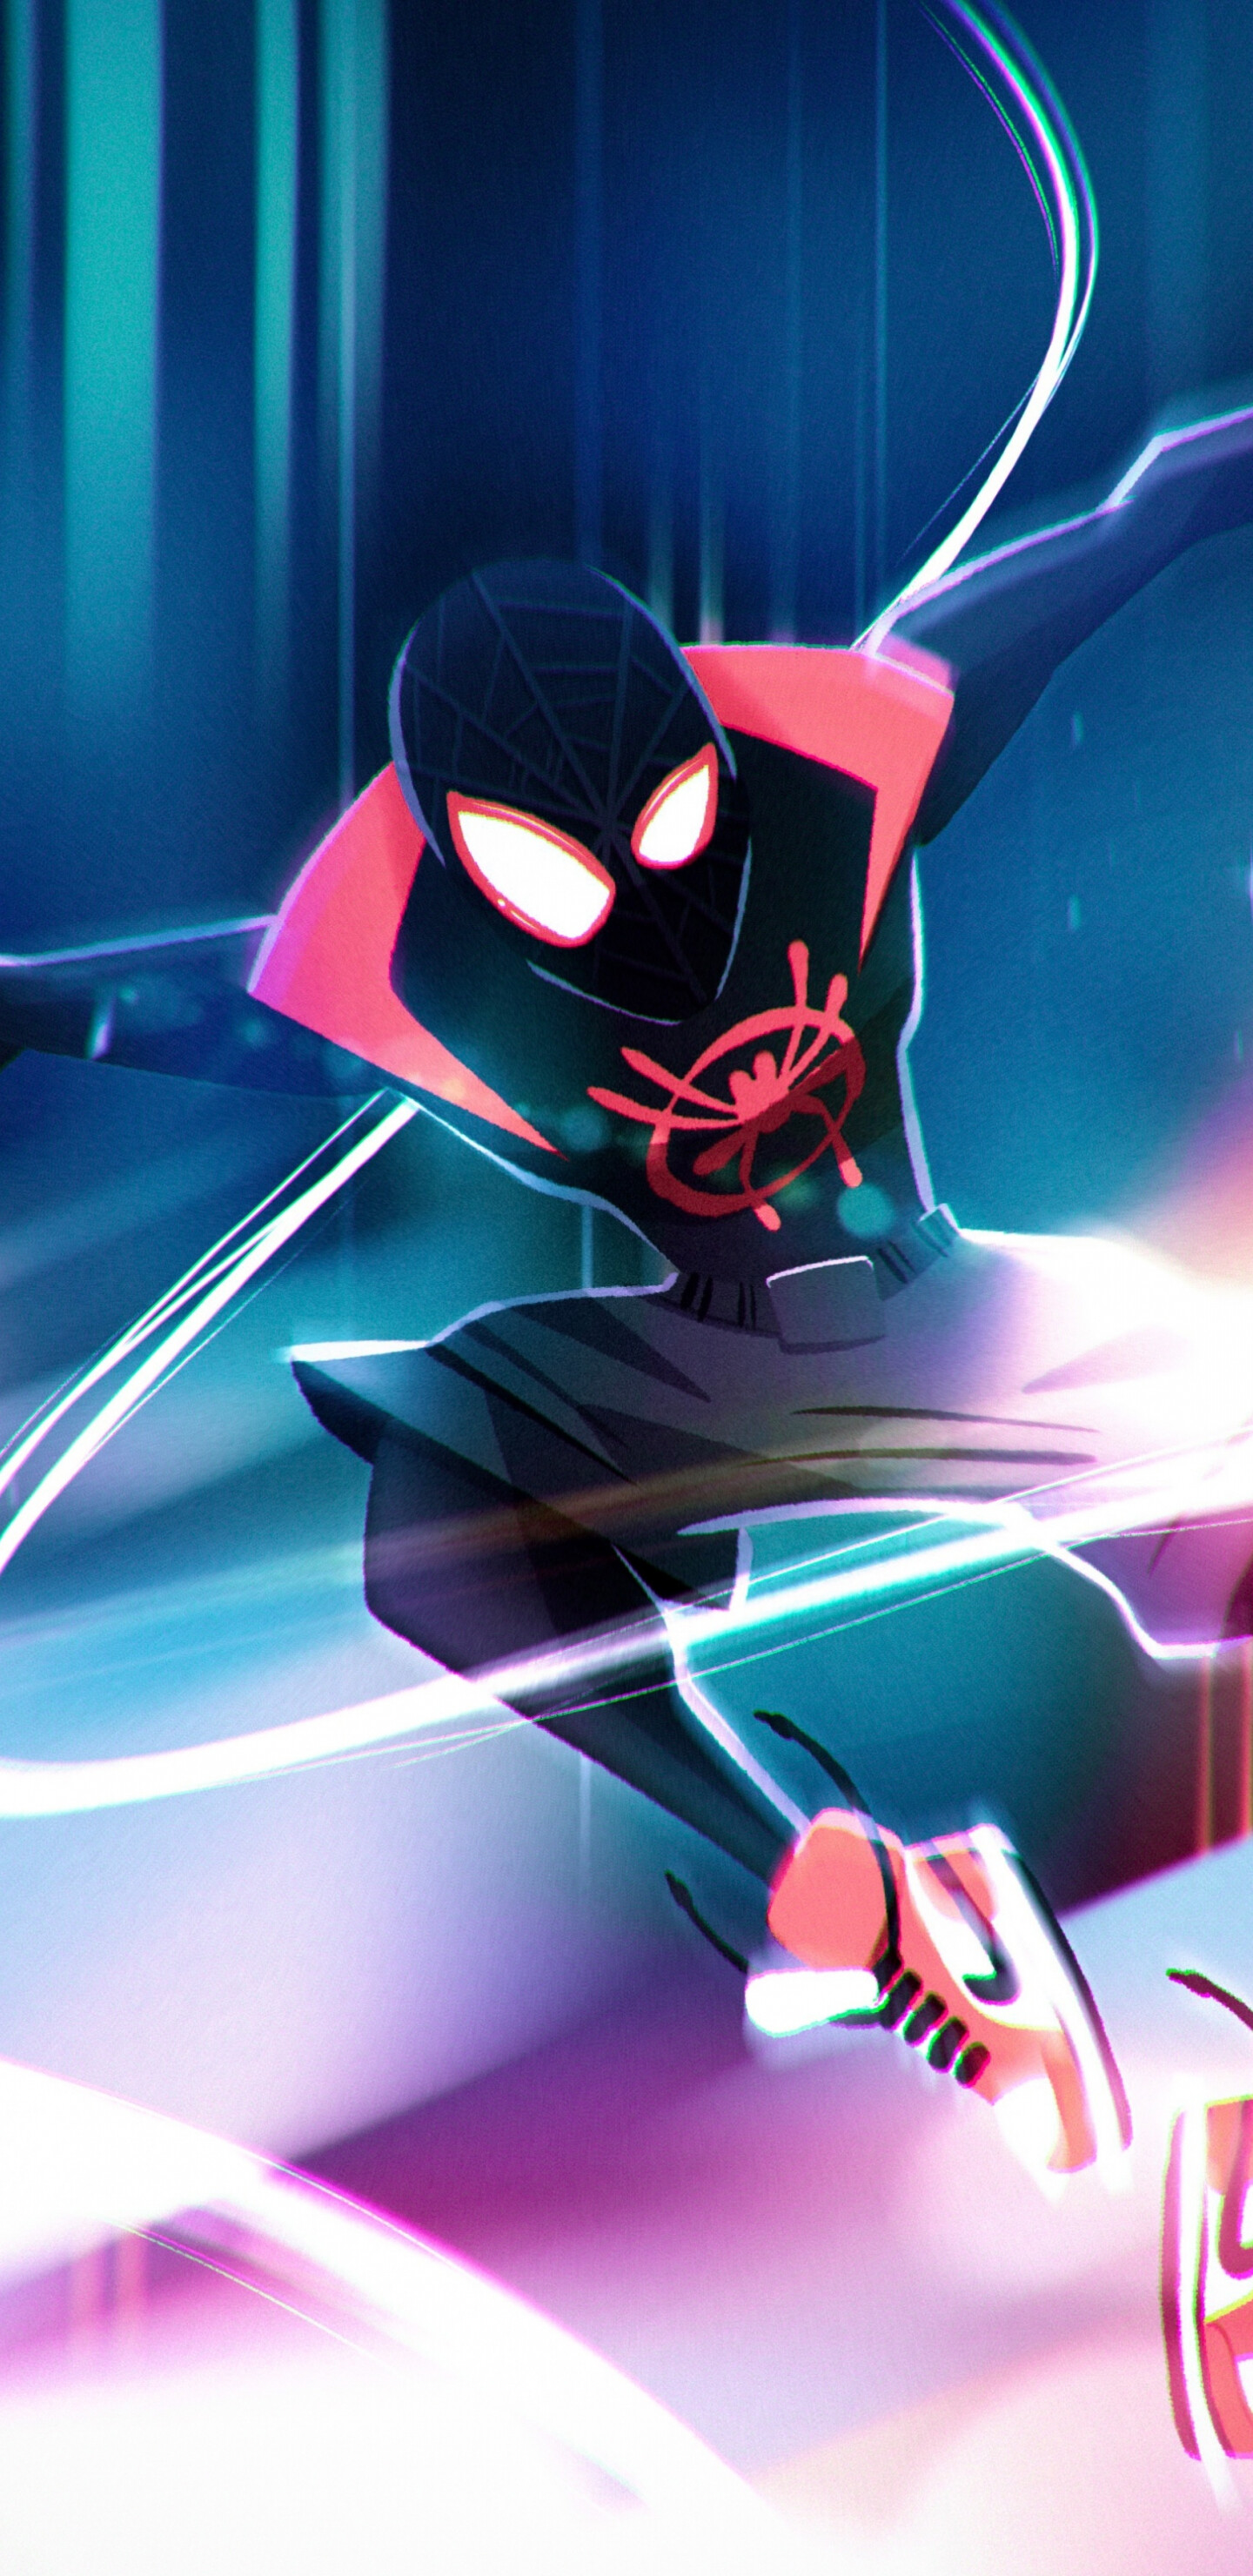 Spider-Man: Into the Spider-Verse: Movie, Animated film, Illustration, Miles Morales. 1440x2960 HD Background.